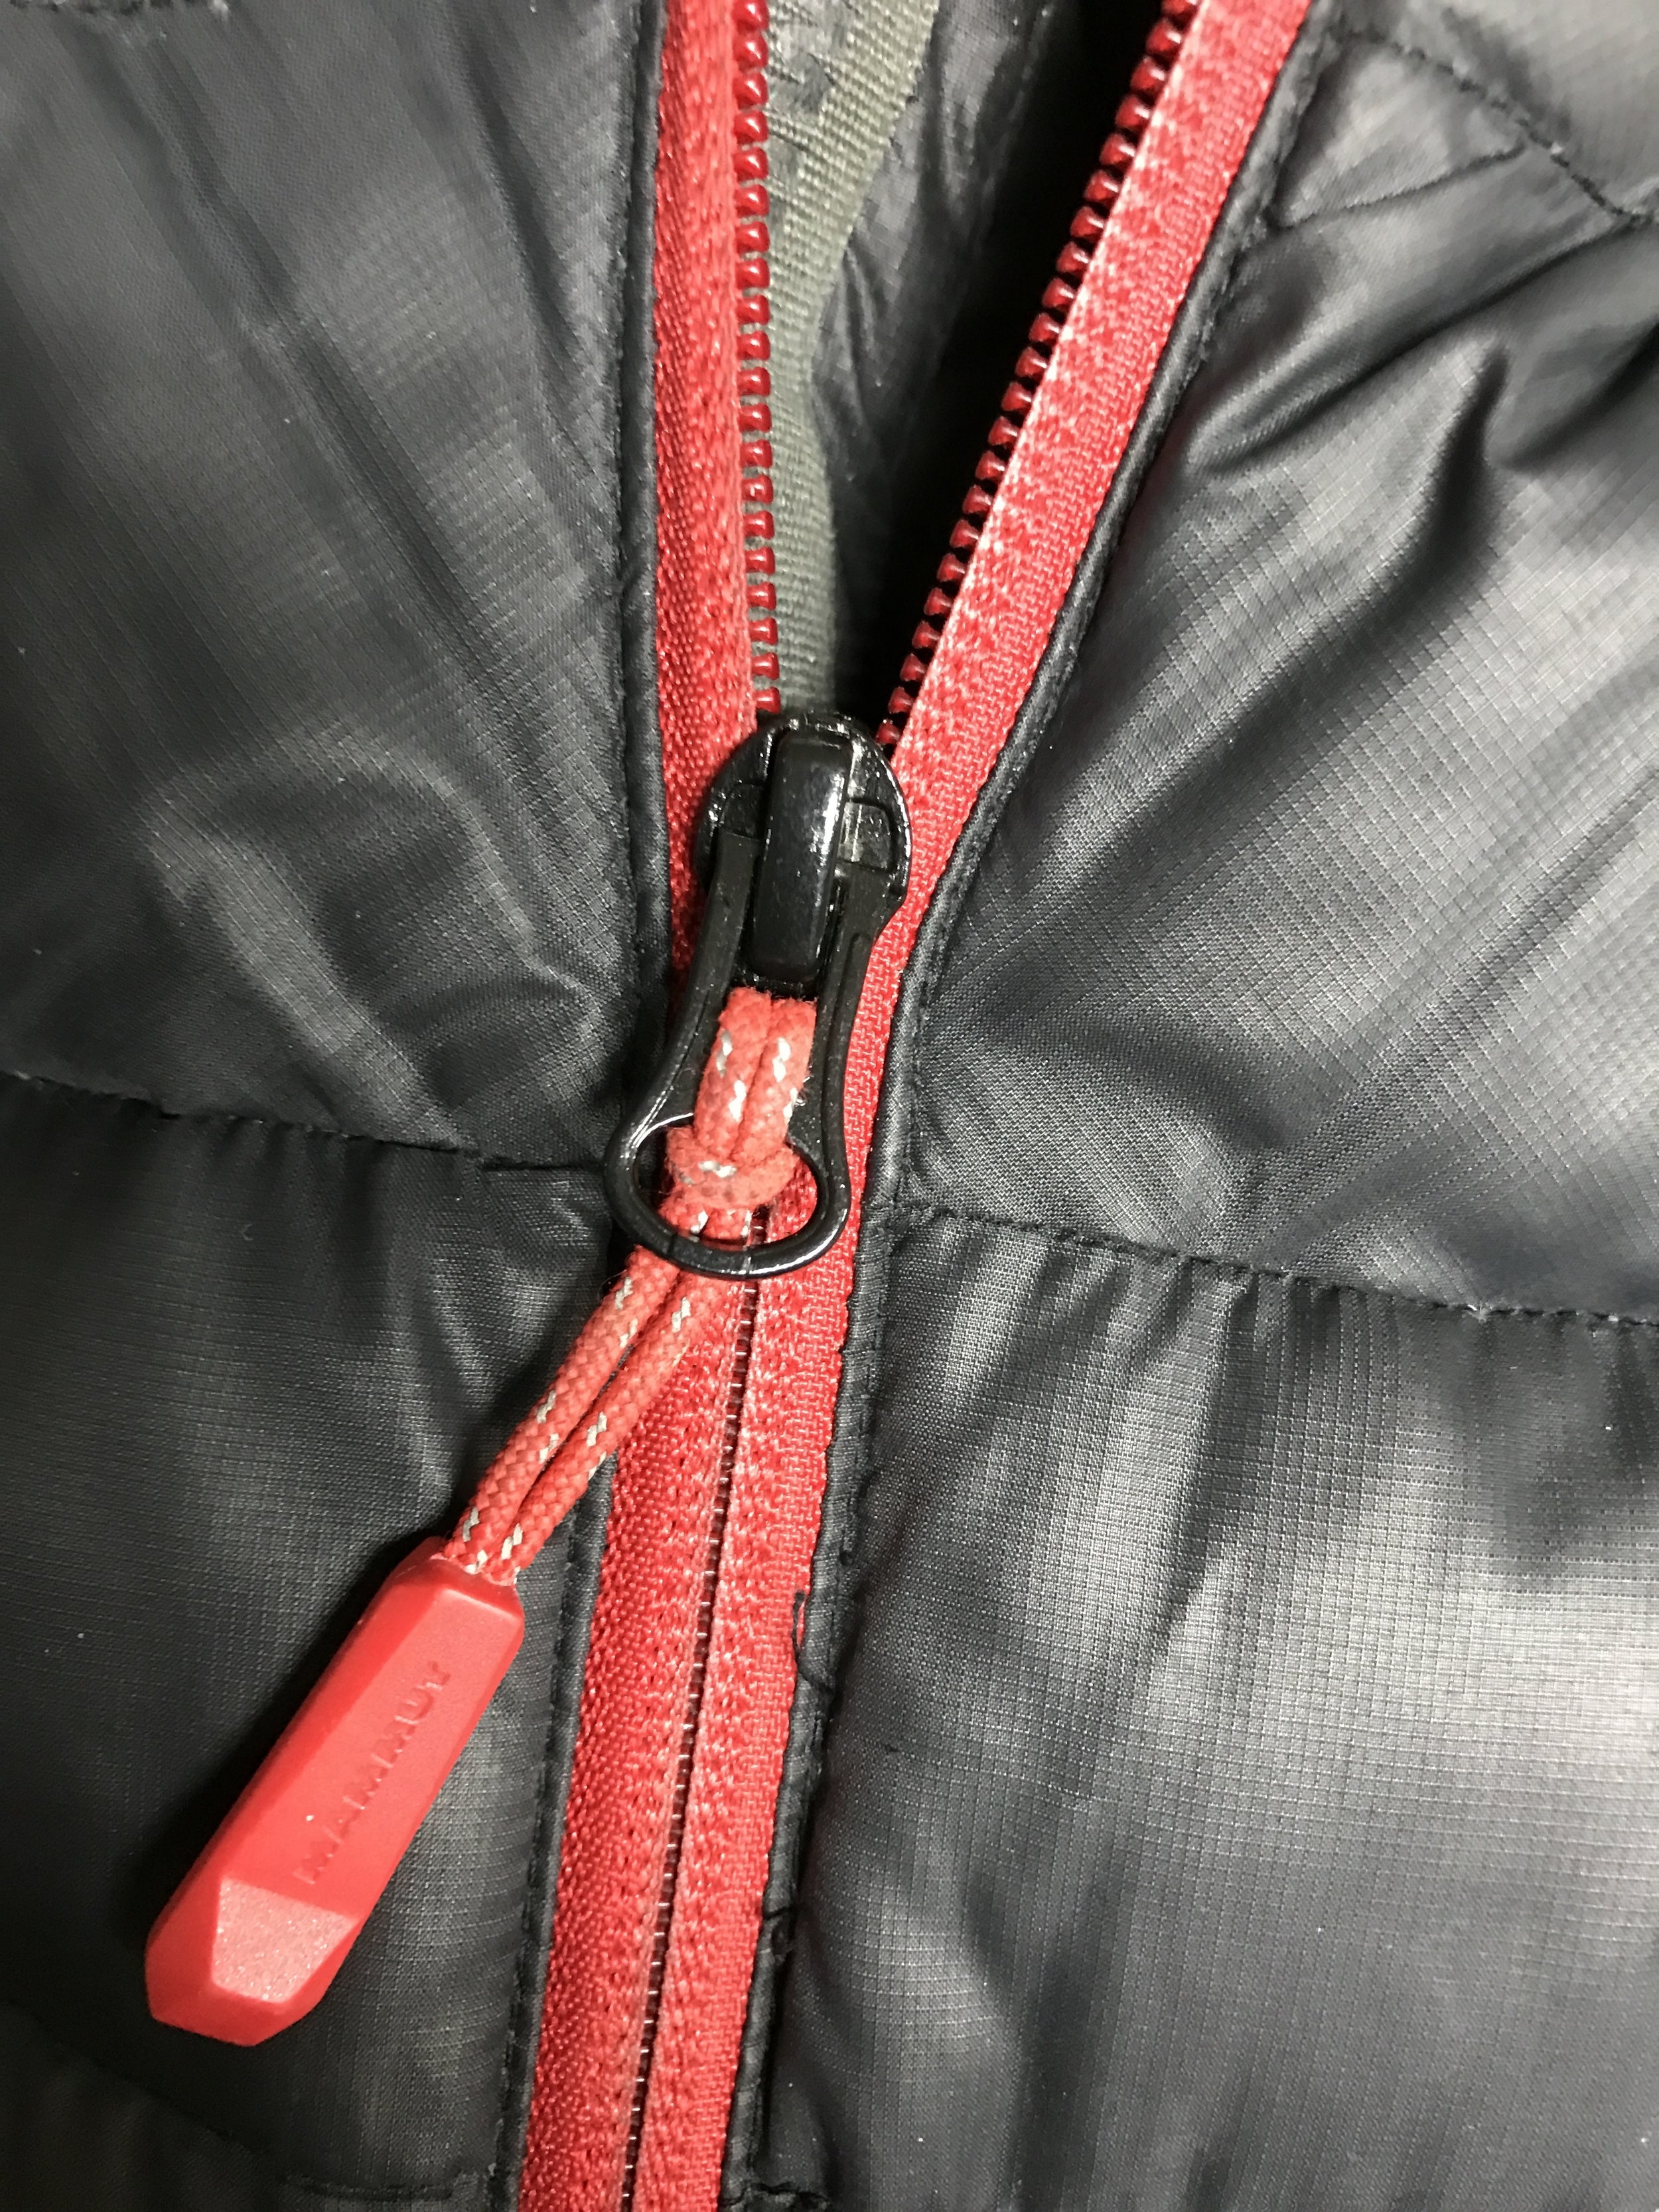 How to Fix Zippers on Outdoor Gear